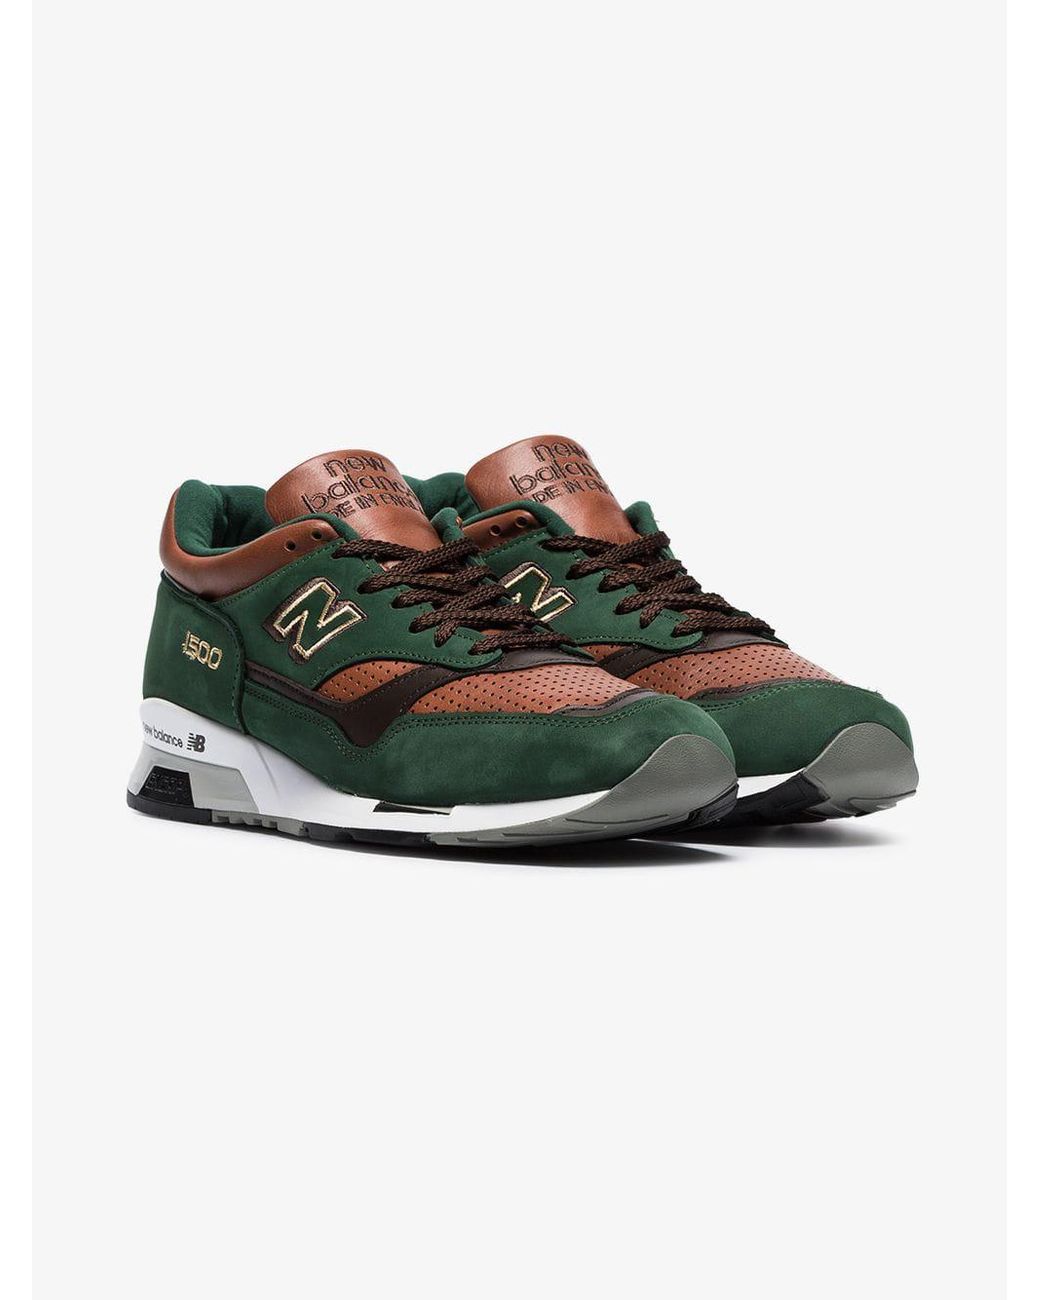 Brillar Subrayar Pino New Balance Green And Brown M1500 Suede Leather Sneakers for Men | Lyst